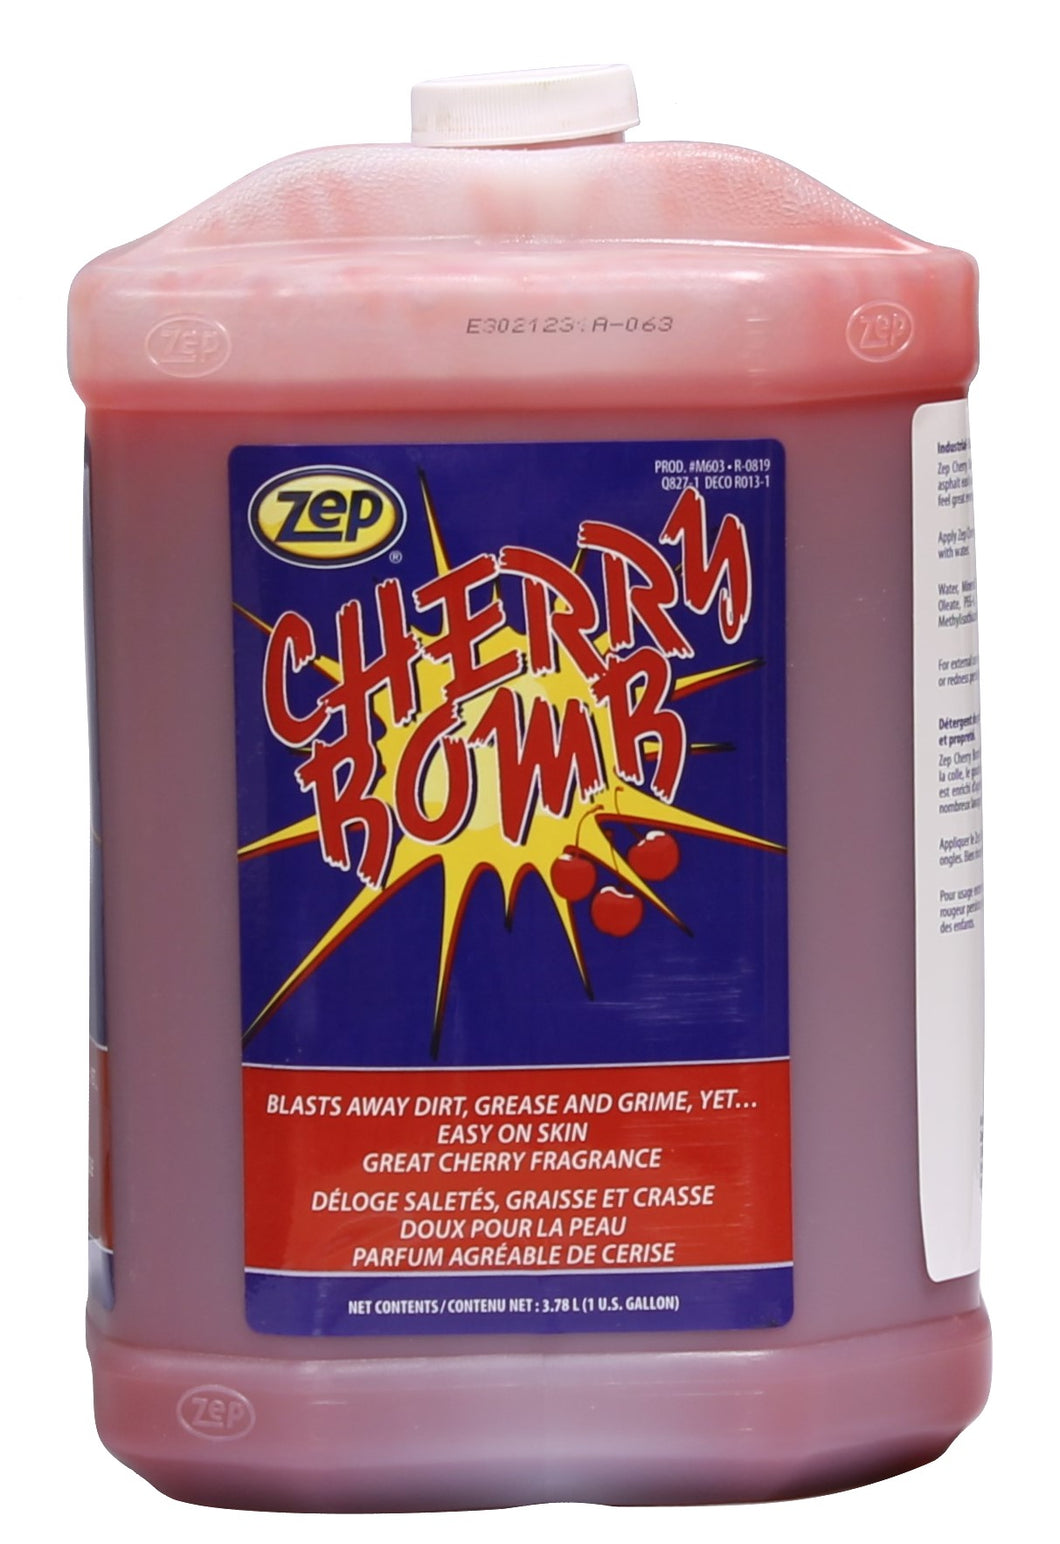 Zep Cherry Bomb NPE FREE Hand Soap 1 Gal with Hand Pump – Clean